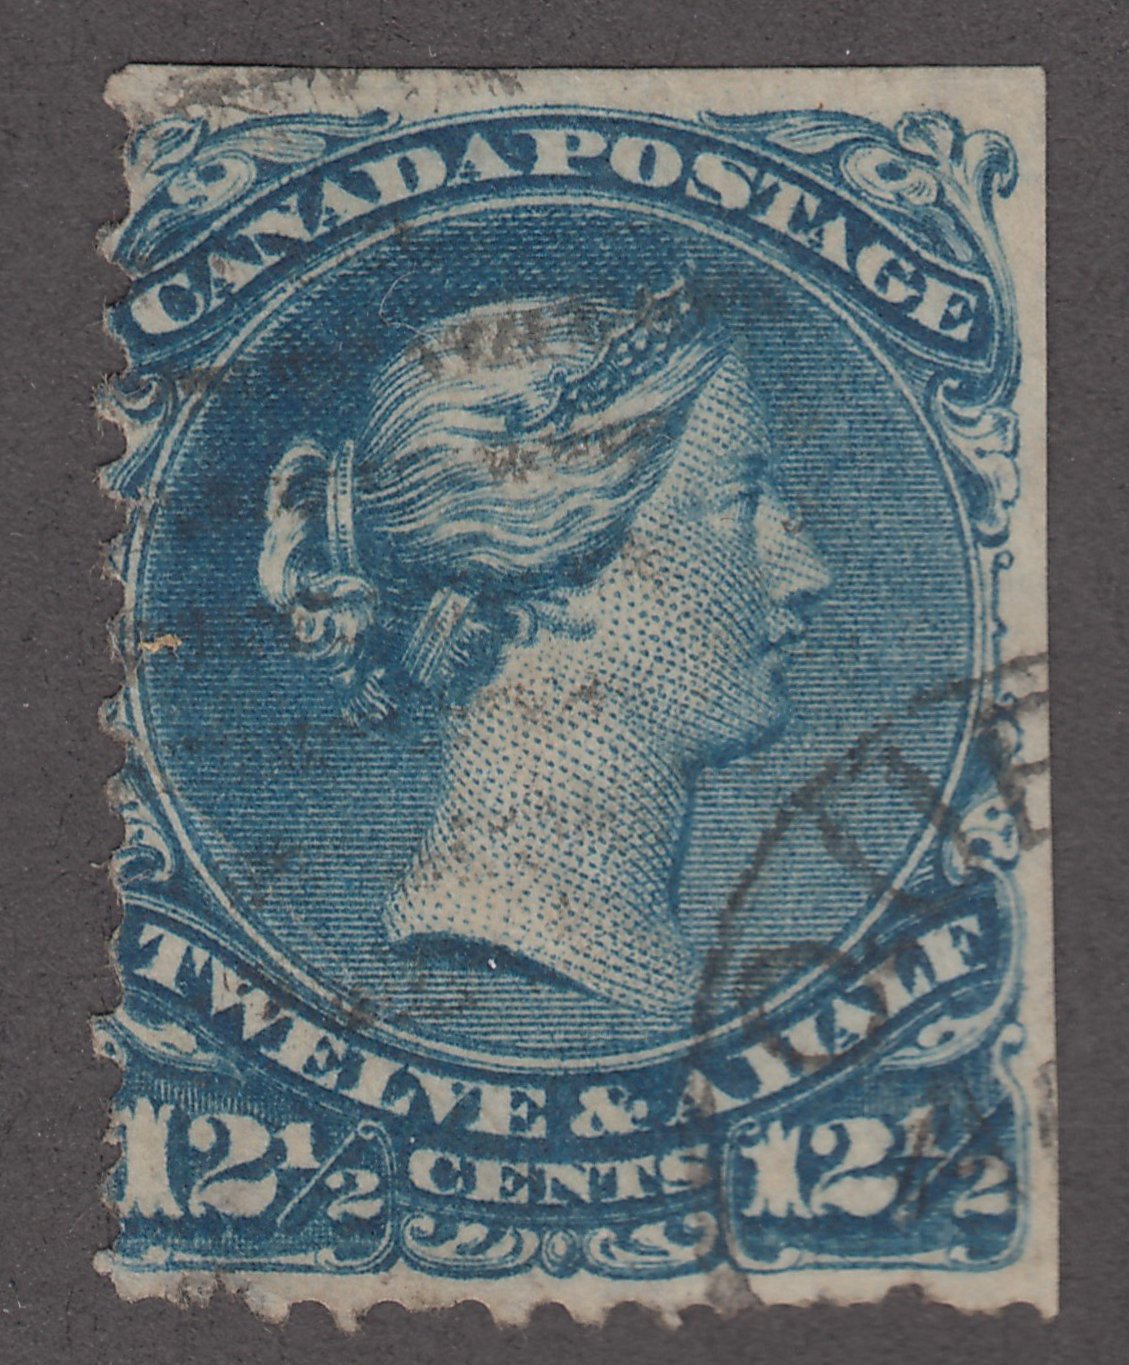 0028CA1808 - Canada #28a - Used, Watermarked Bothwell Paper